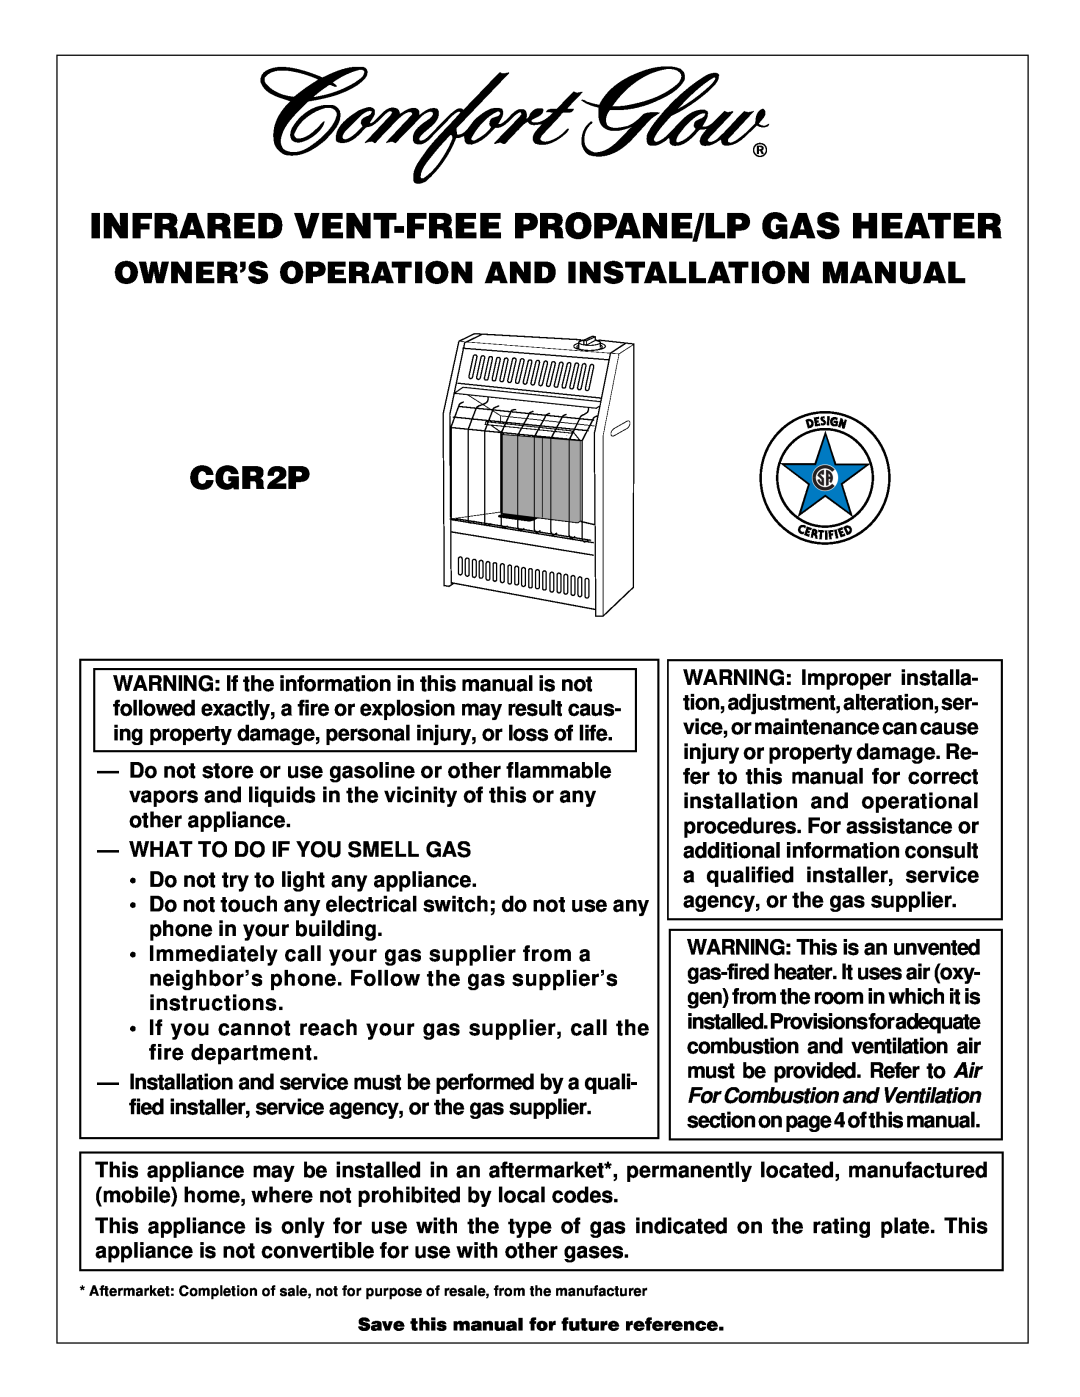 Desa CGR2P installation manual Infrared Vent-Freepropane/Lp Gas Heater, Owner’S Operation And Installation Manual 